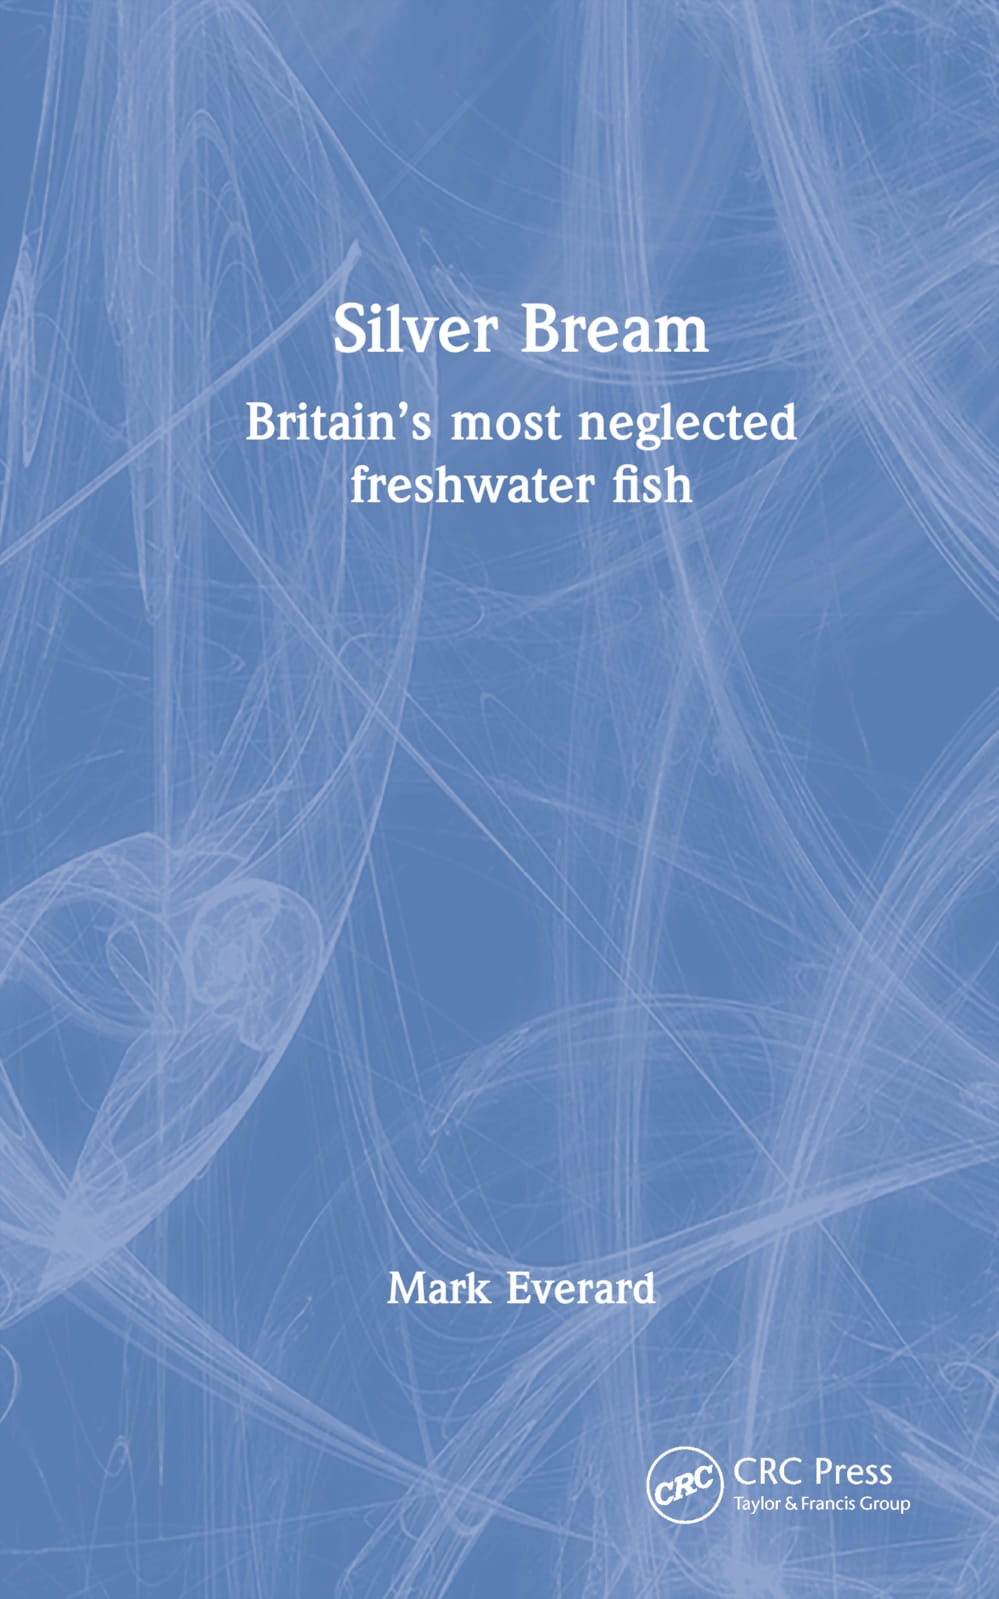 Silver Bream: Britain’s Most Neglected Freshwater Fish